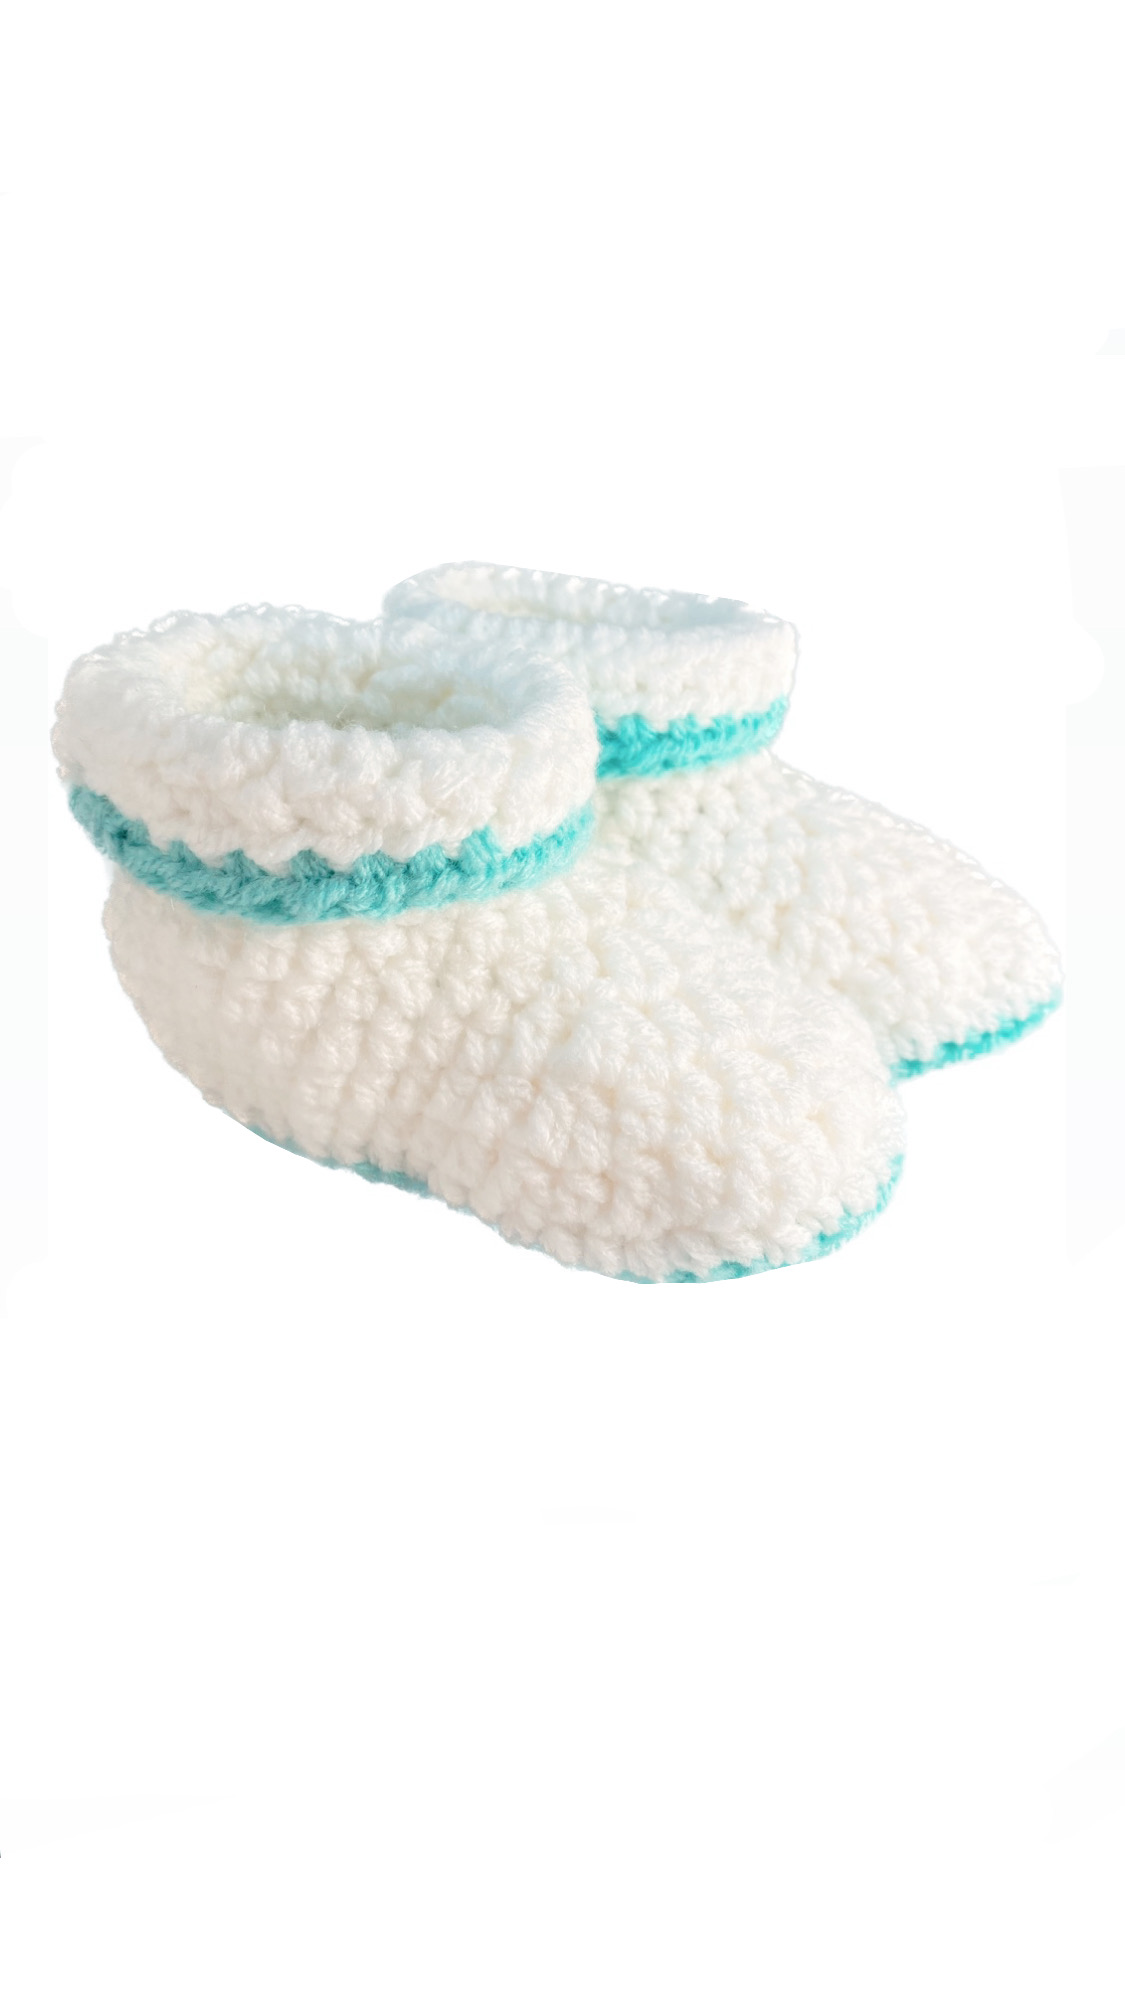 Pikkaboo Cuddles and Snuggles Crochet Baby Booties - White & Green